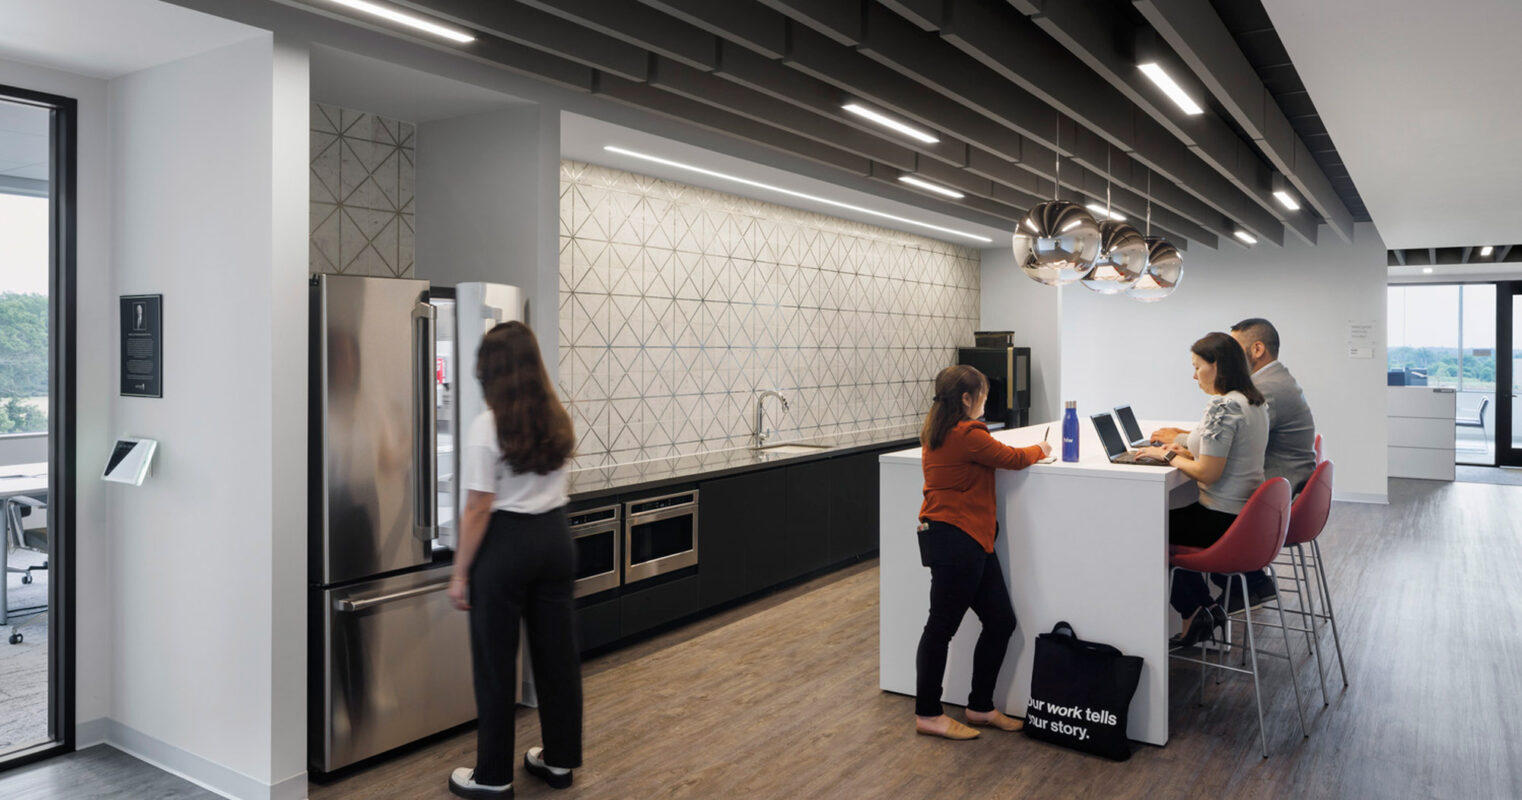 Modern office kitchen featuring stainless steel appliances, white cabinetry, and geometric backsplash. Pendant lighting illuminates a central island where employees converse casually. Monochrome color palette with natural light accentuating clean lines and minimalist design.